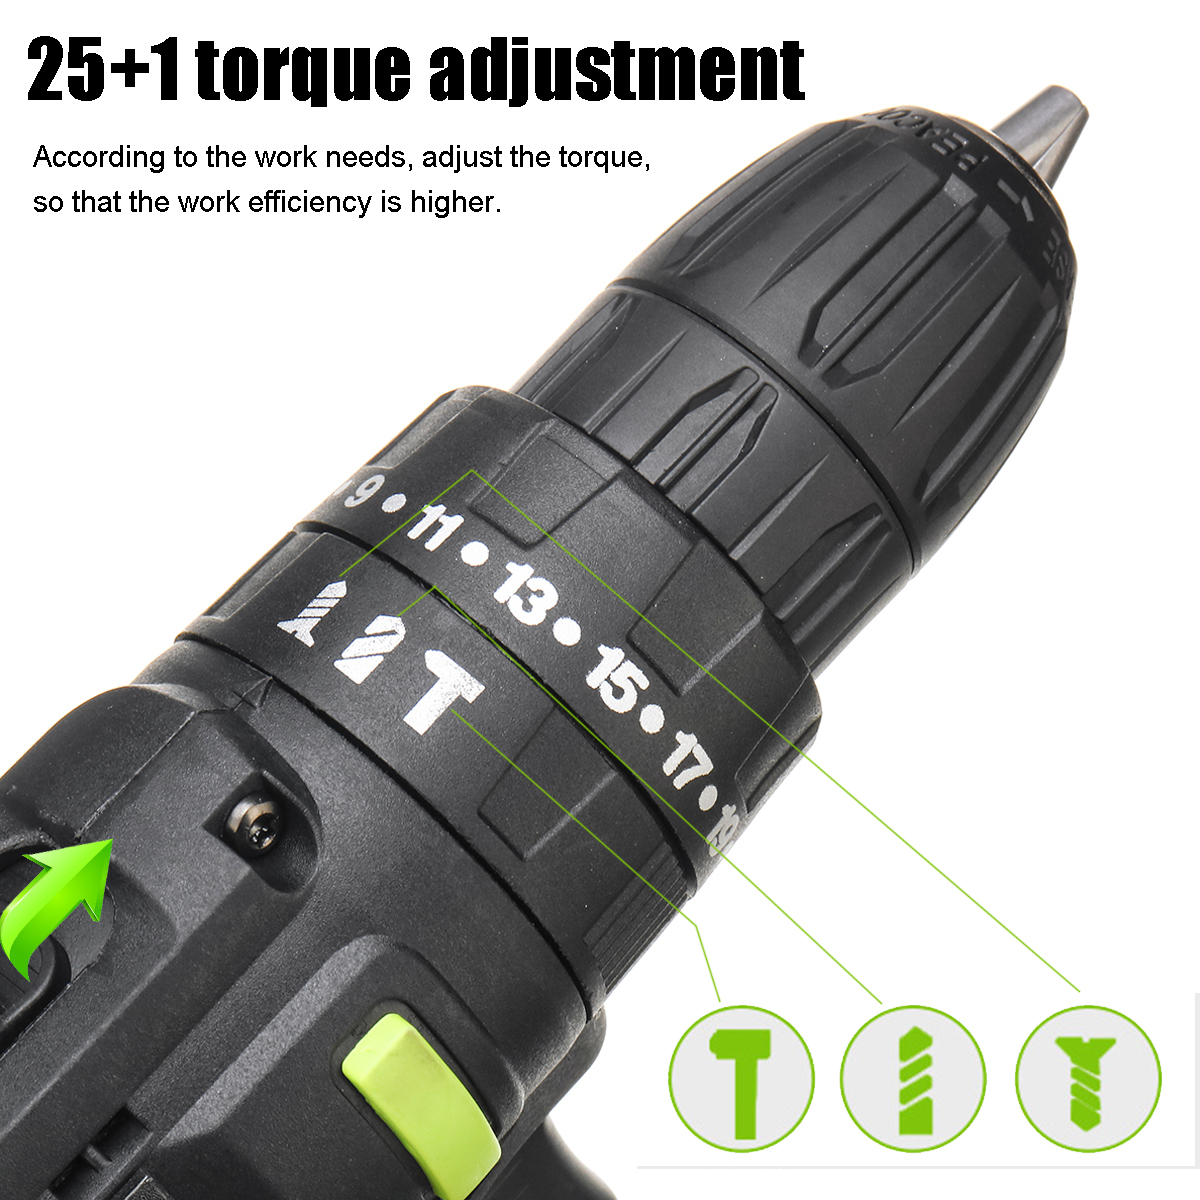 48VF-3-in-1-251-Gears-Electric-Impact-Drill-2-Speeds-Rechargeable-Screwdriver-W-LED-Light-1733392-5